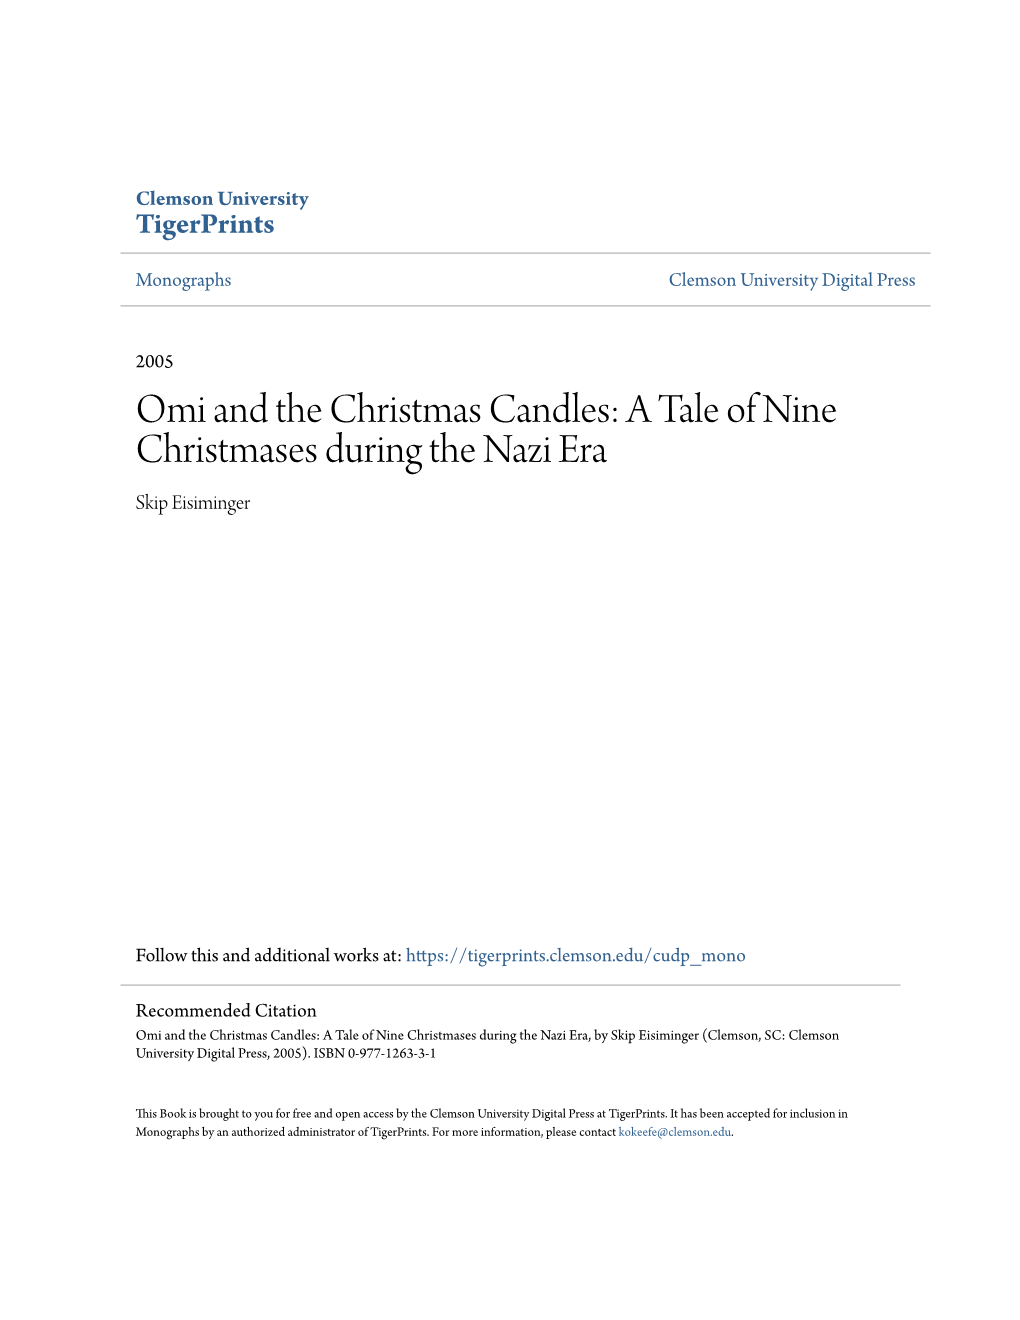 Omi and the Christmas Candles: a Tale of Nine Christmases During the Nazi Era Skip Eisiminger